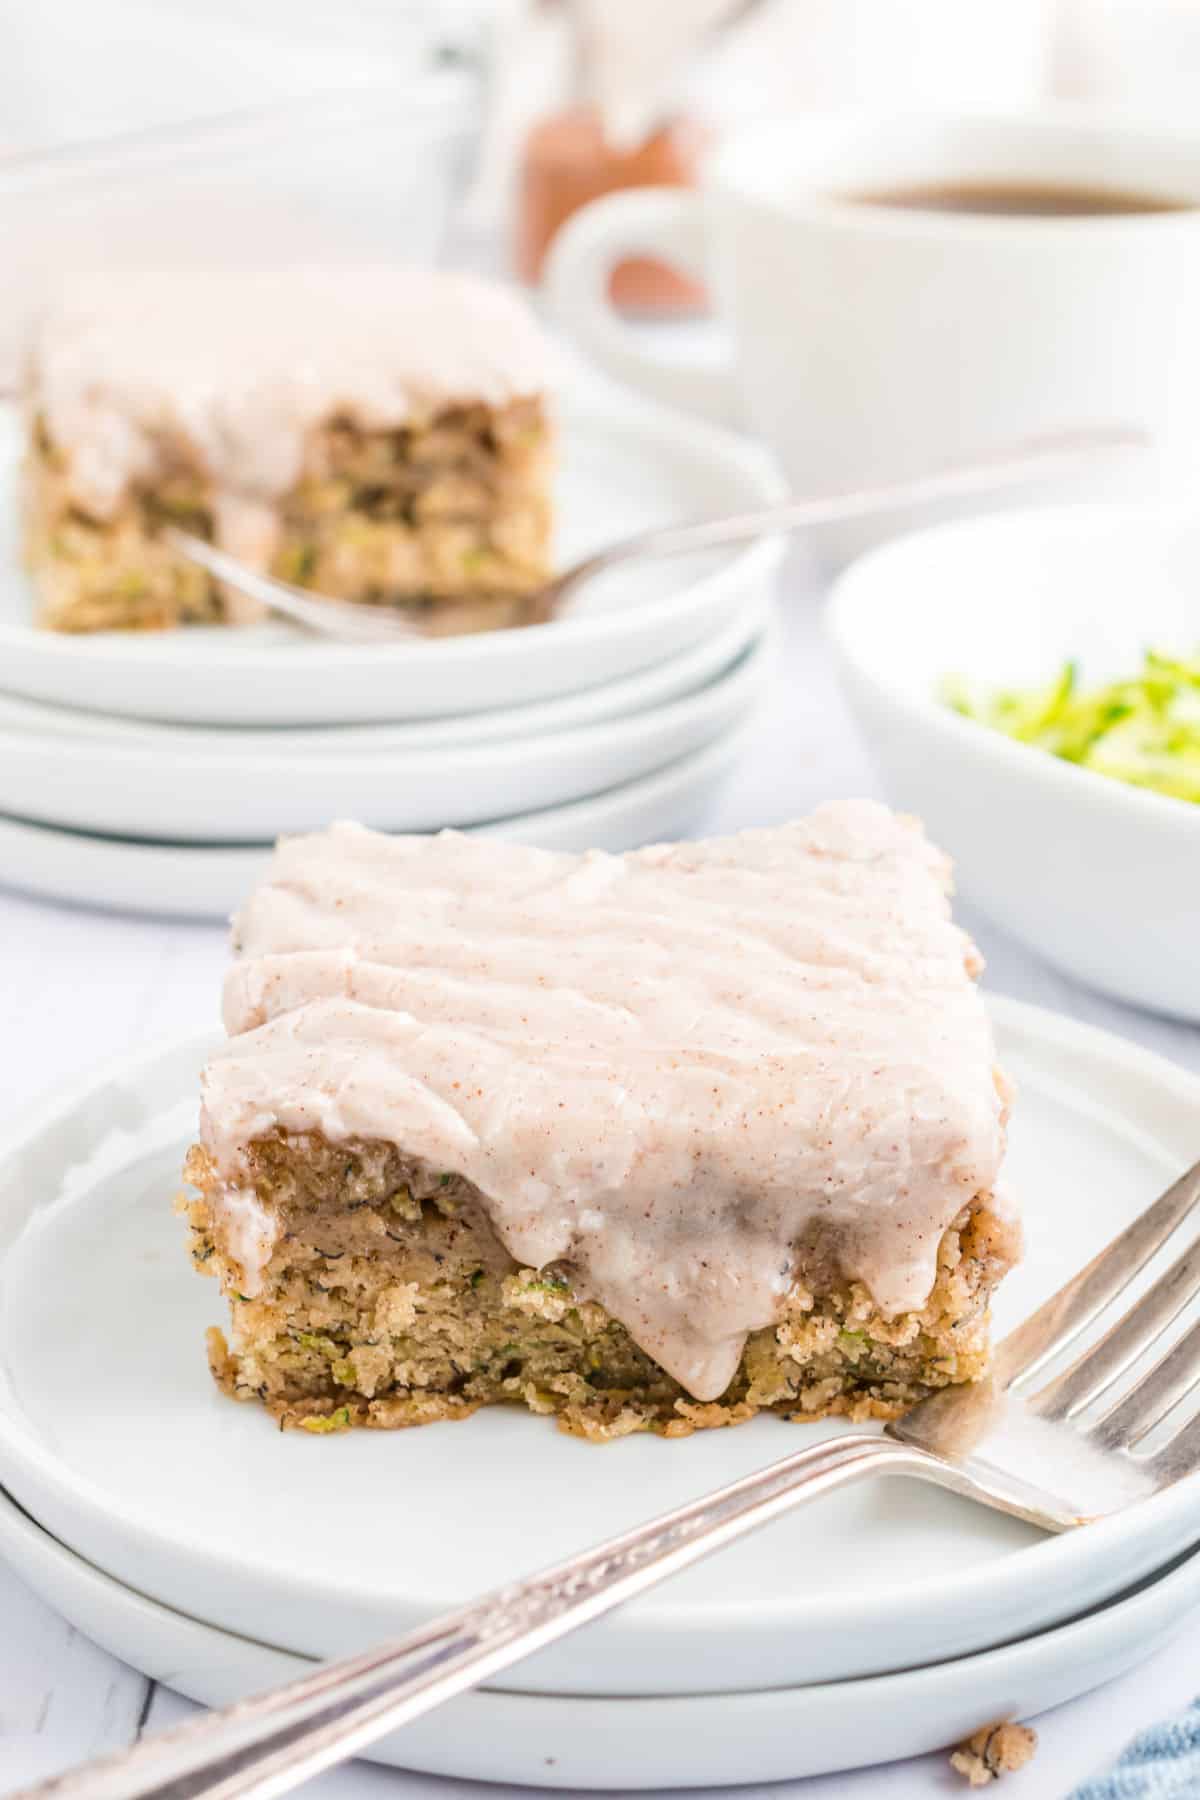 Banana zucchini bars with cinnamon icing on a white plate.